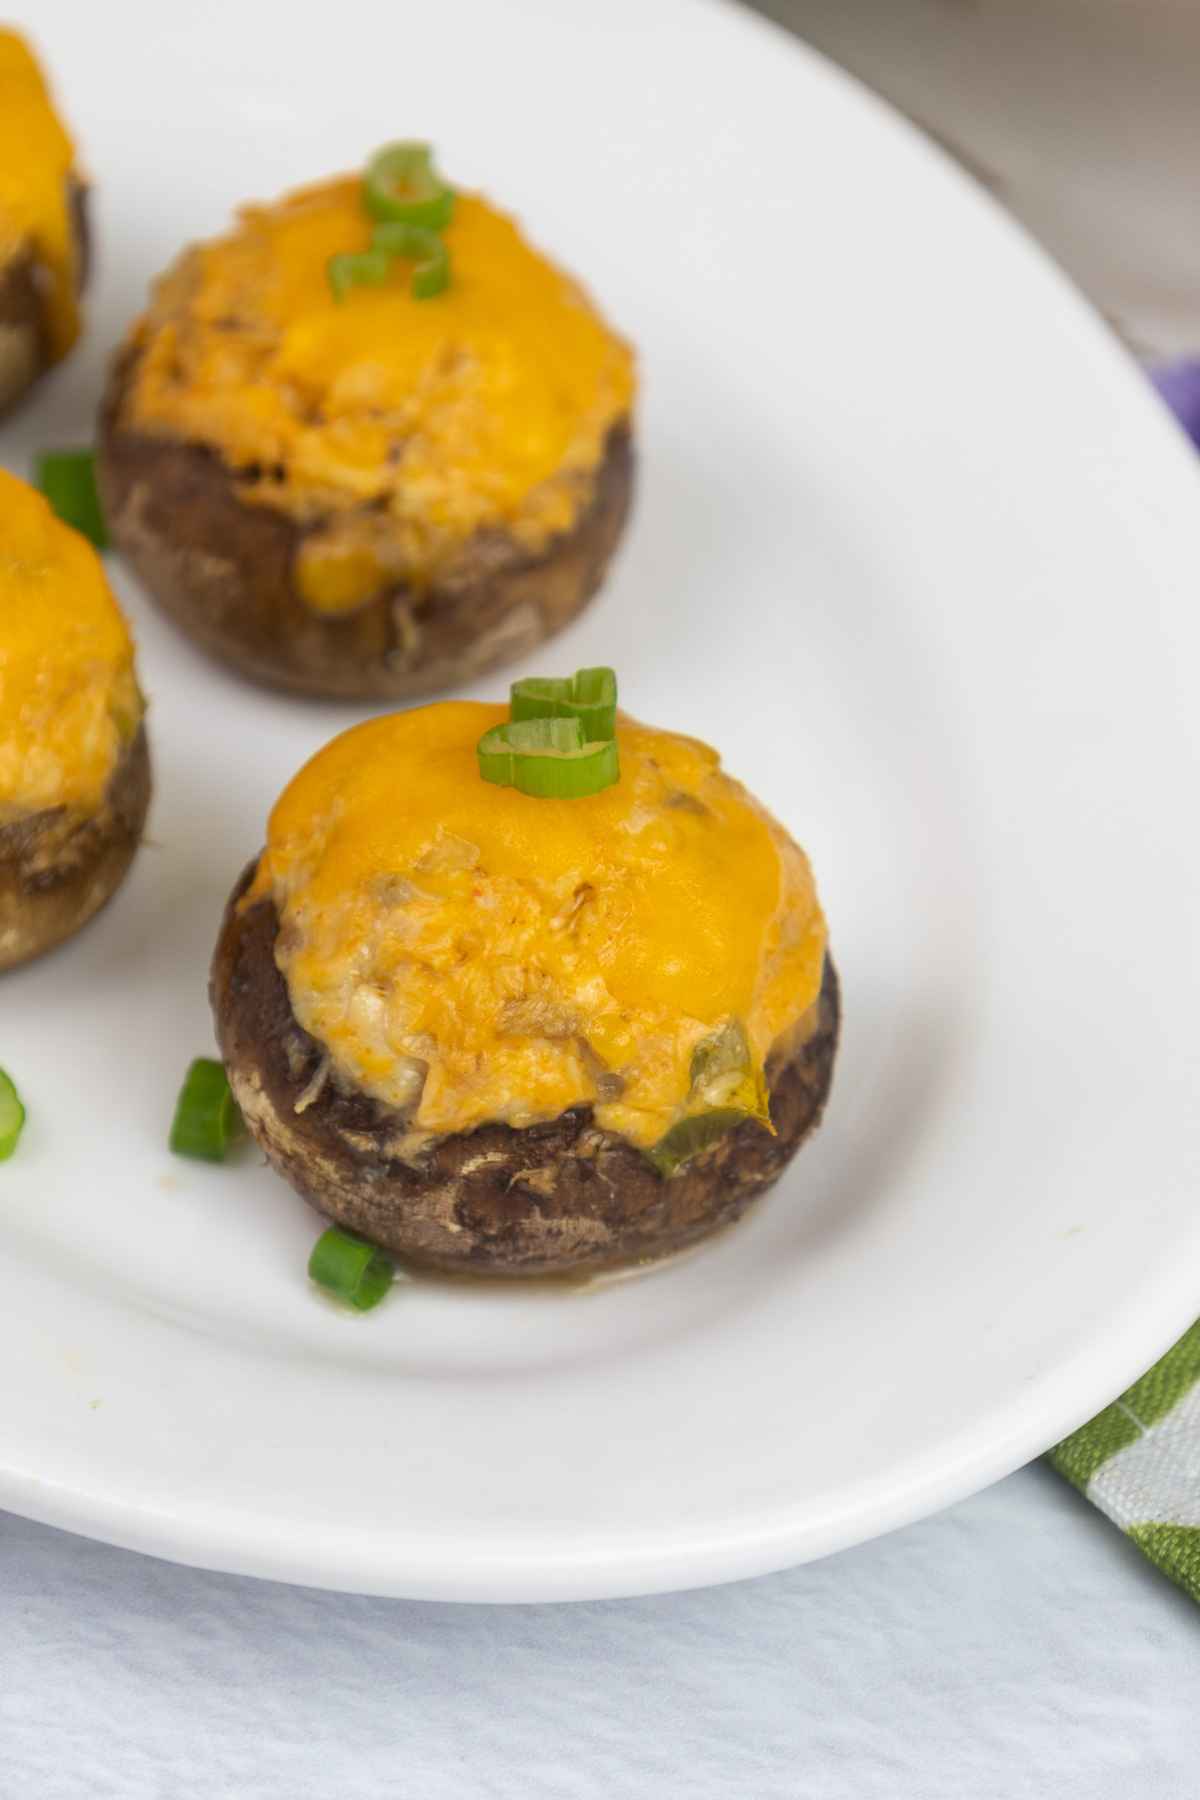 Baked buffalo chicken stuffed mushrooms on a white plate garnished with green onion tops.